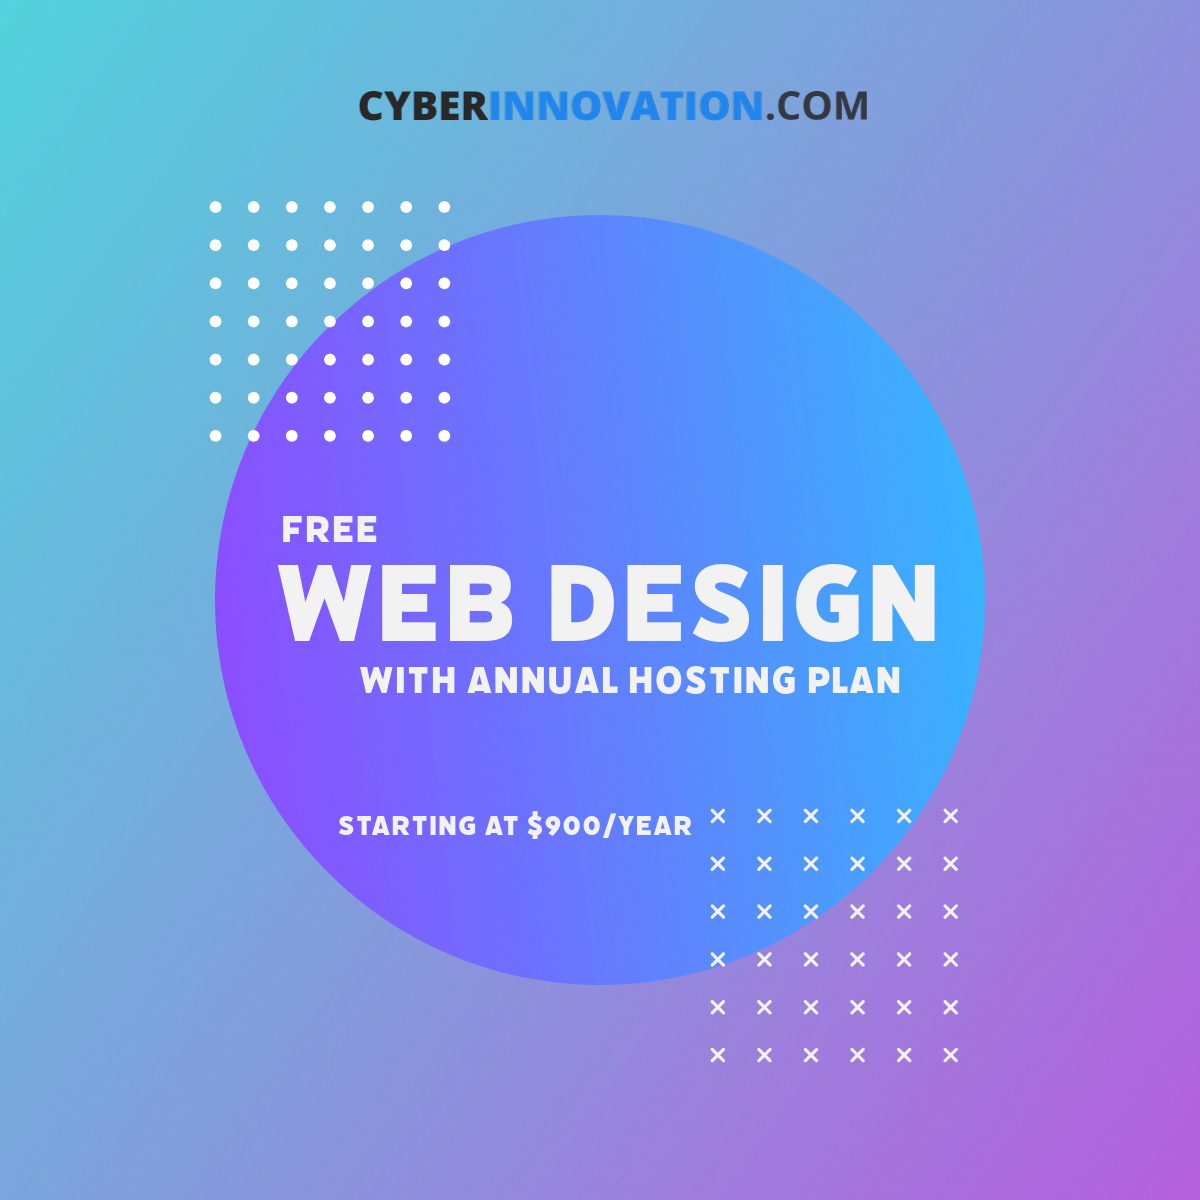 Free Web Design with annual hosting